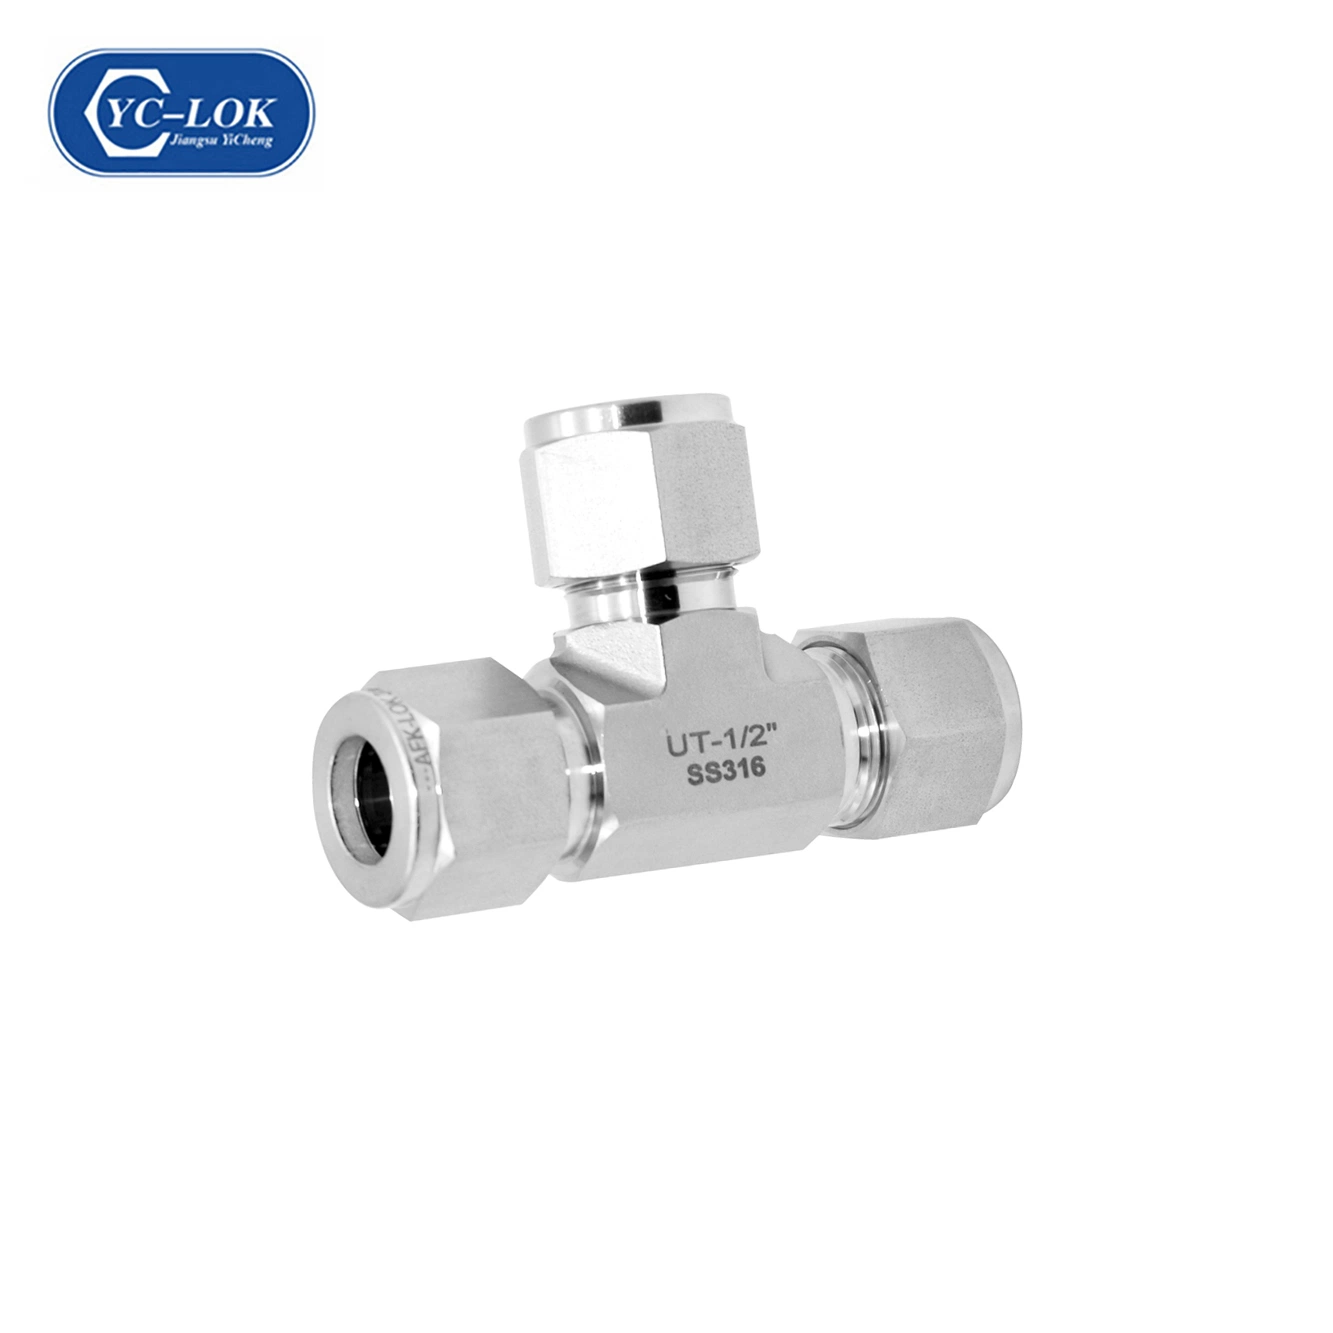 Double Ferrule Compression Connector 316 Ss Swagelok Tube Fitting Tee Elbow Union with Cutting Rings for Instrumentation